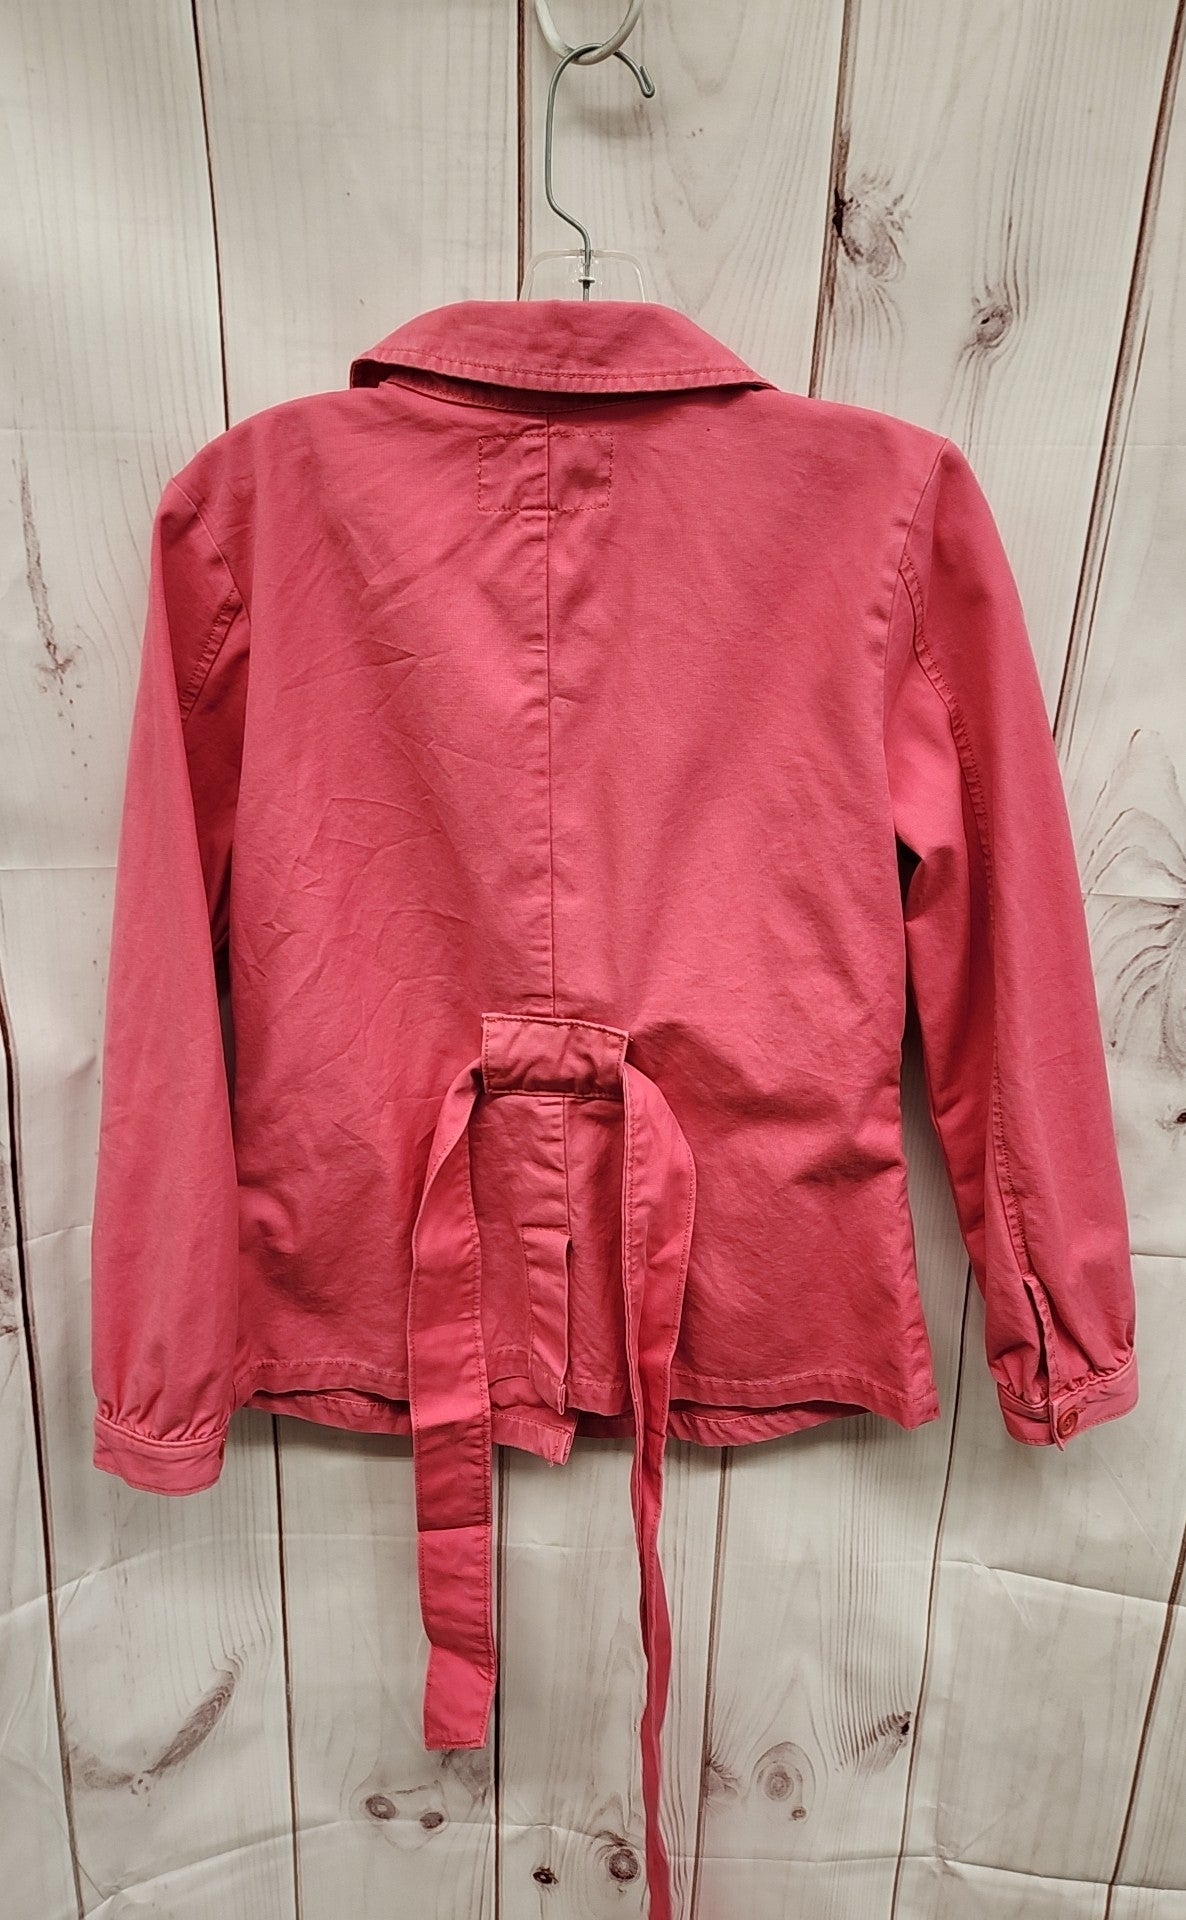 Old Navy Women's Size M Pink Jacket